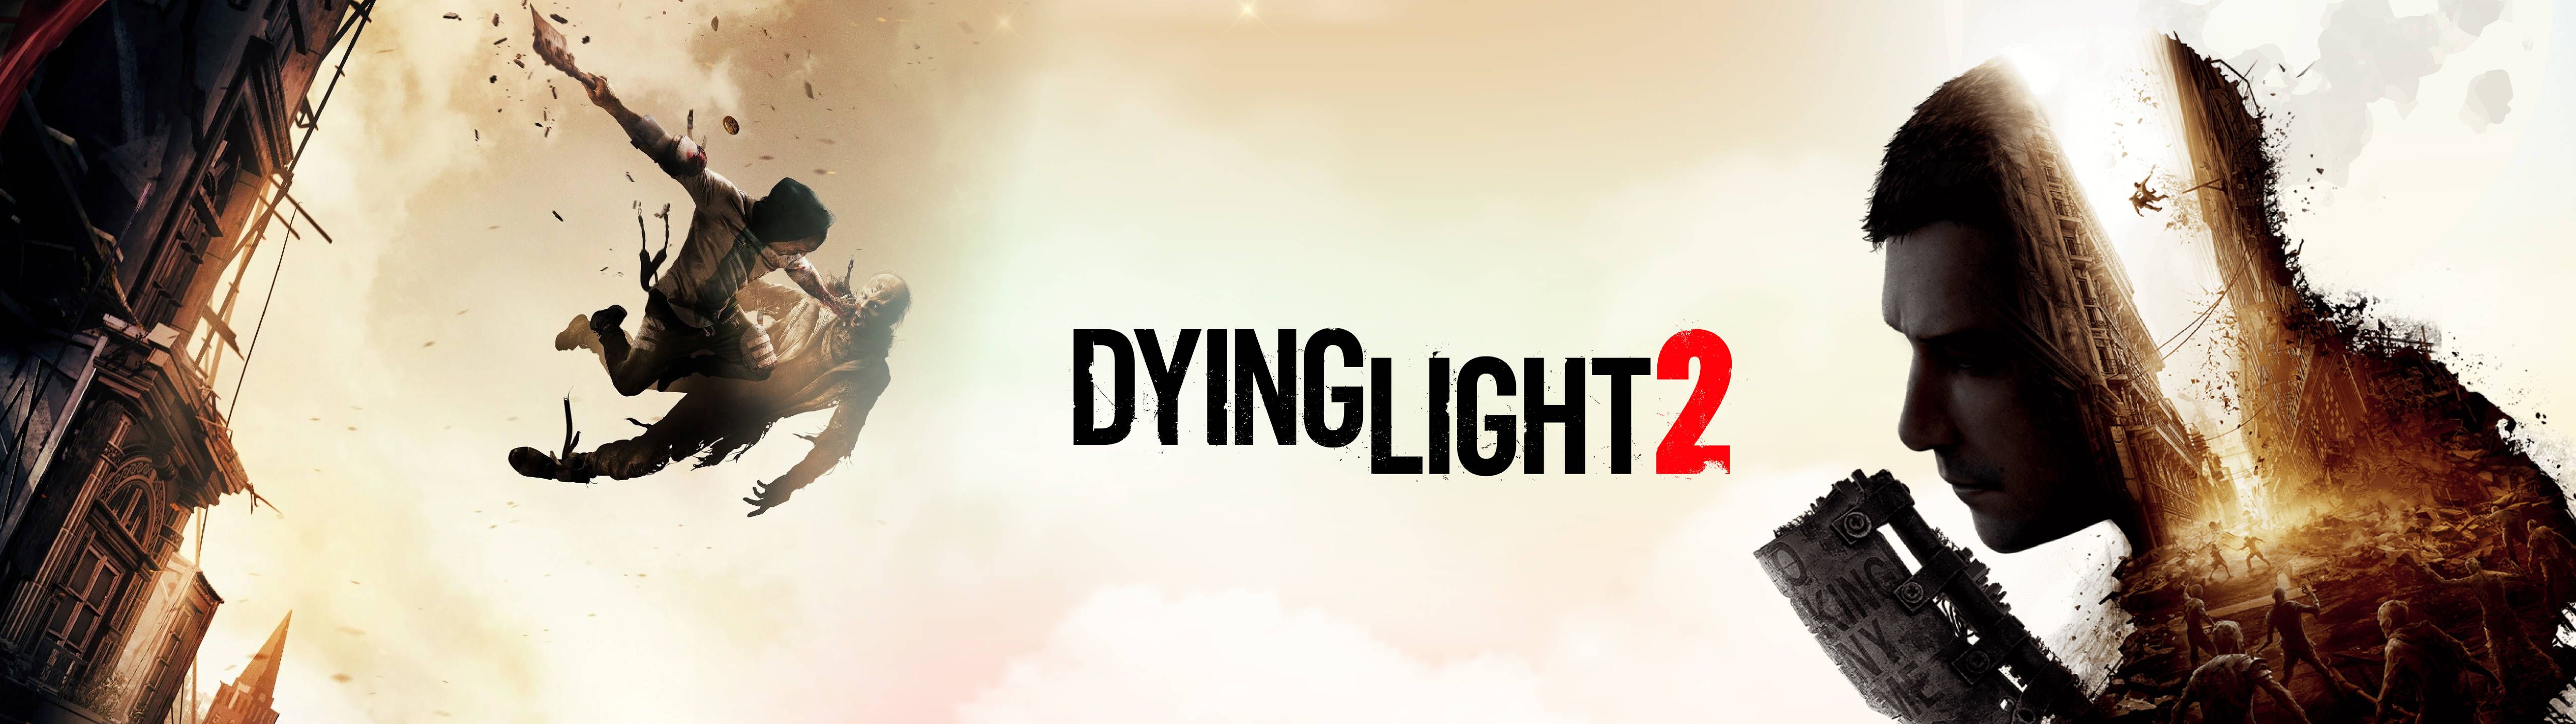 Dying Light 2 logo with a man falling from a building and another man holding a gun - 5120x1440